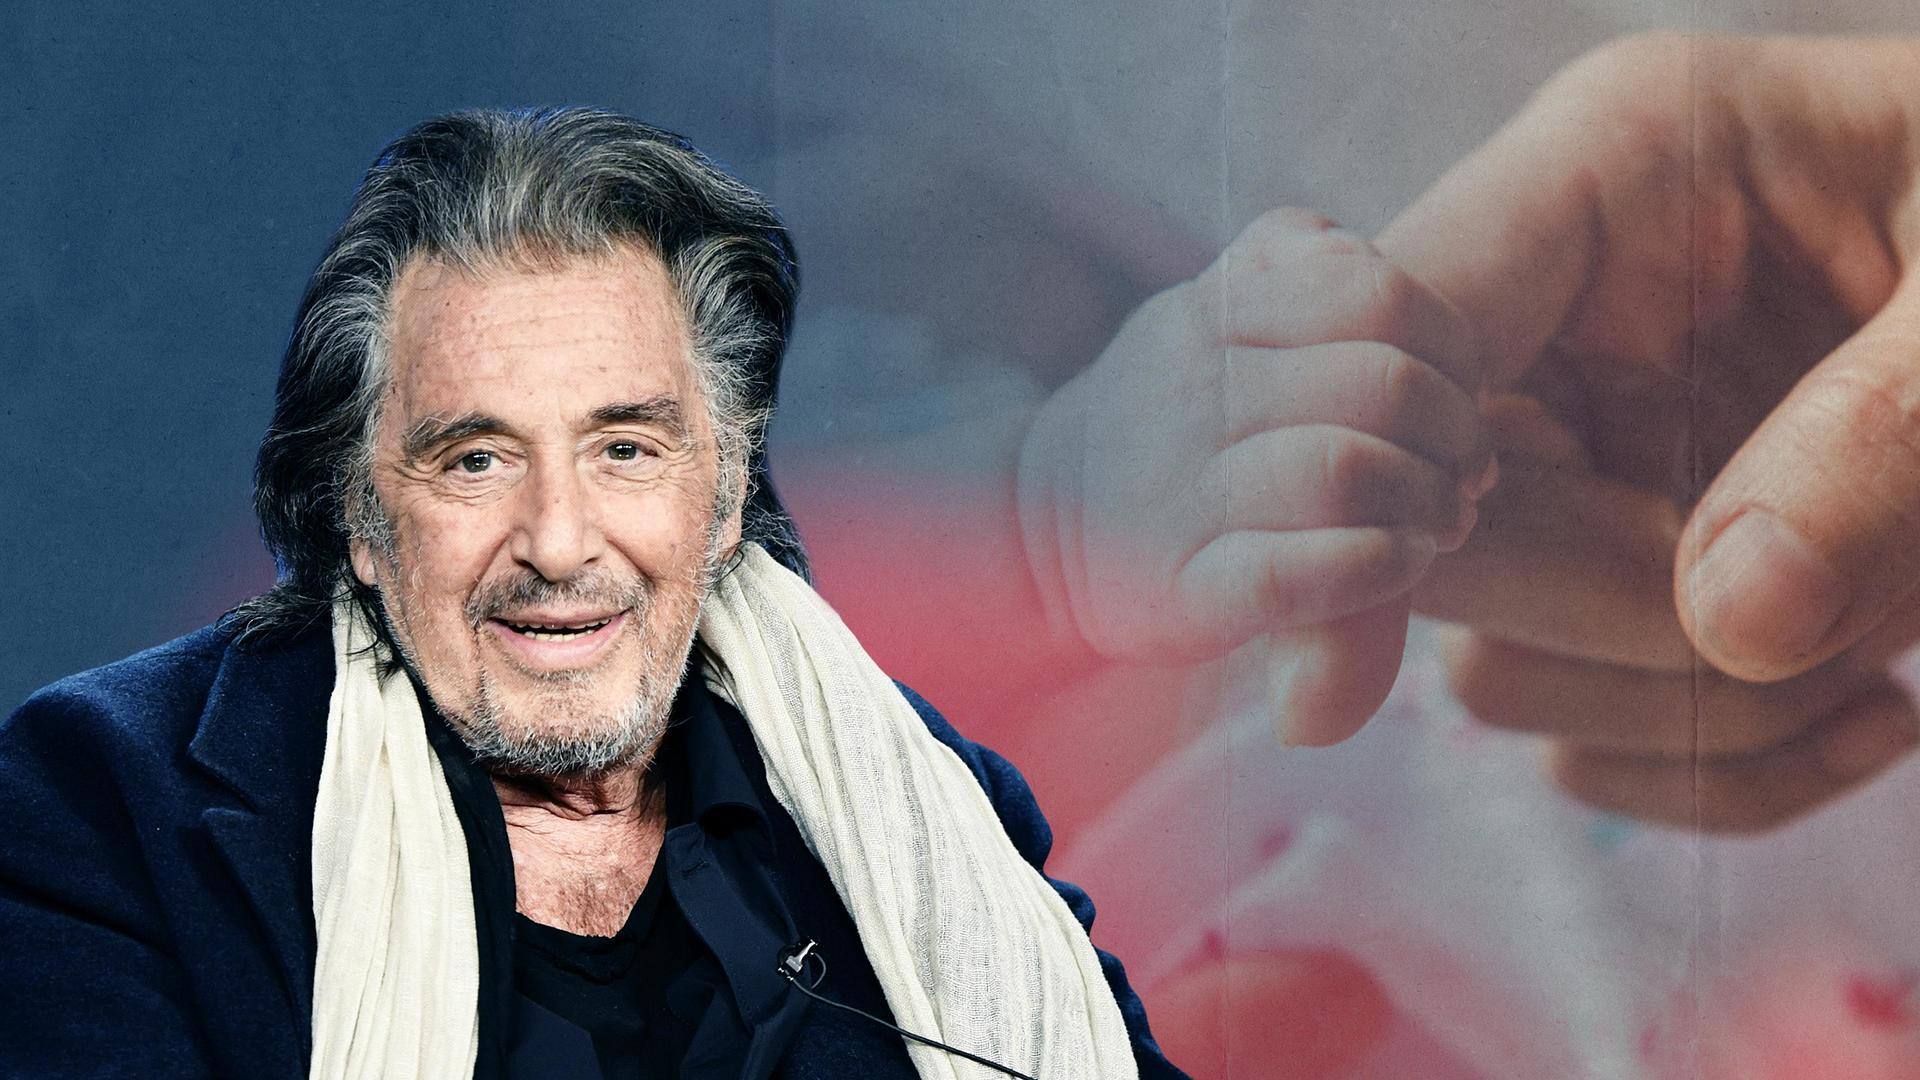 Al Pacino becomes father again; welcomes baby boy at 83